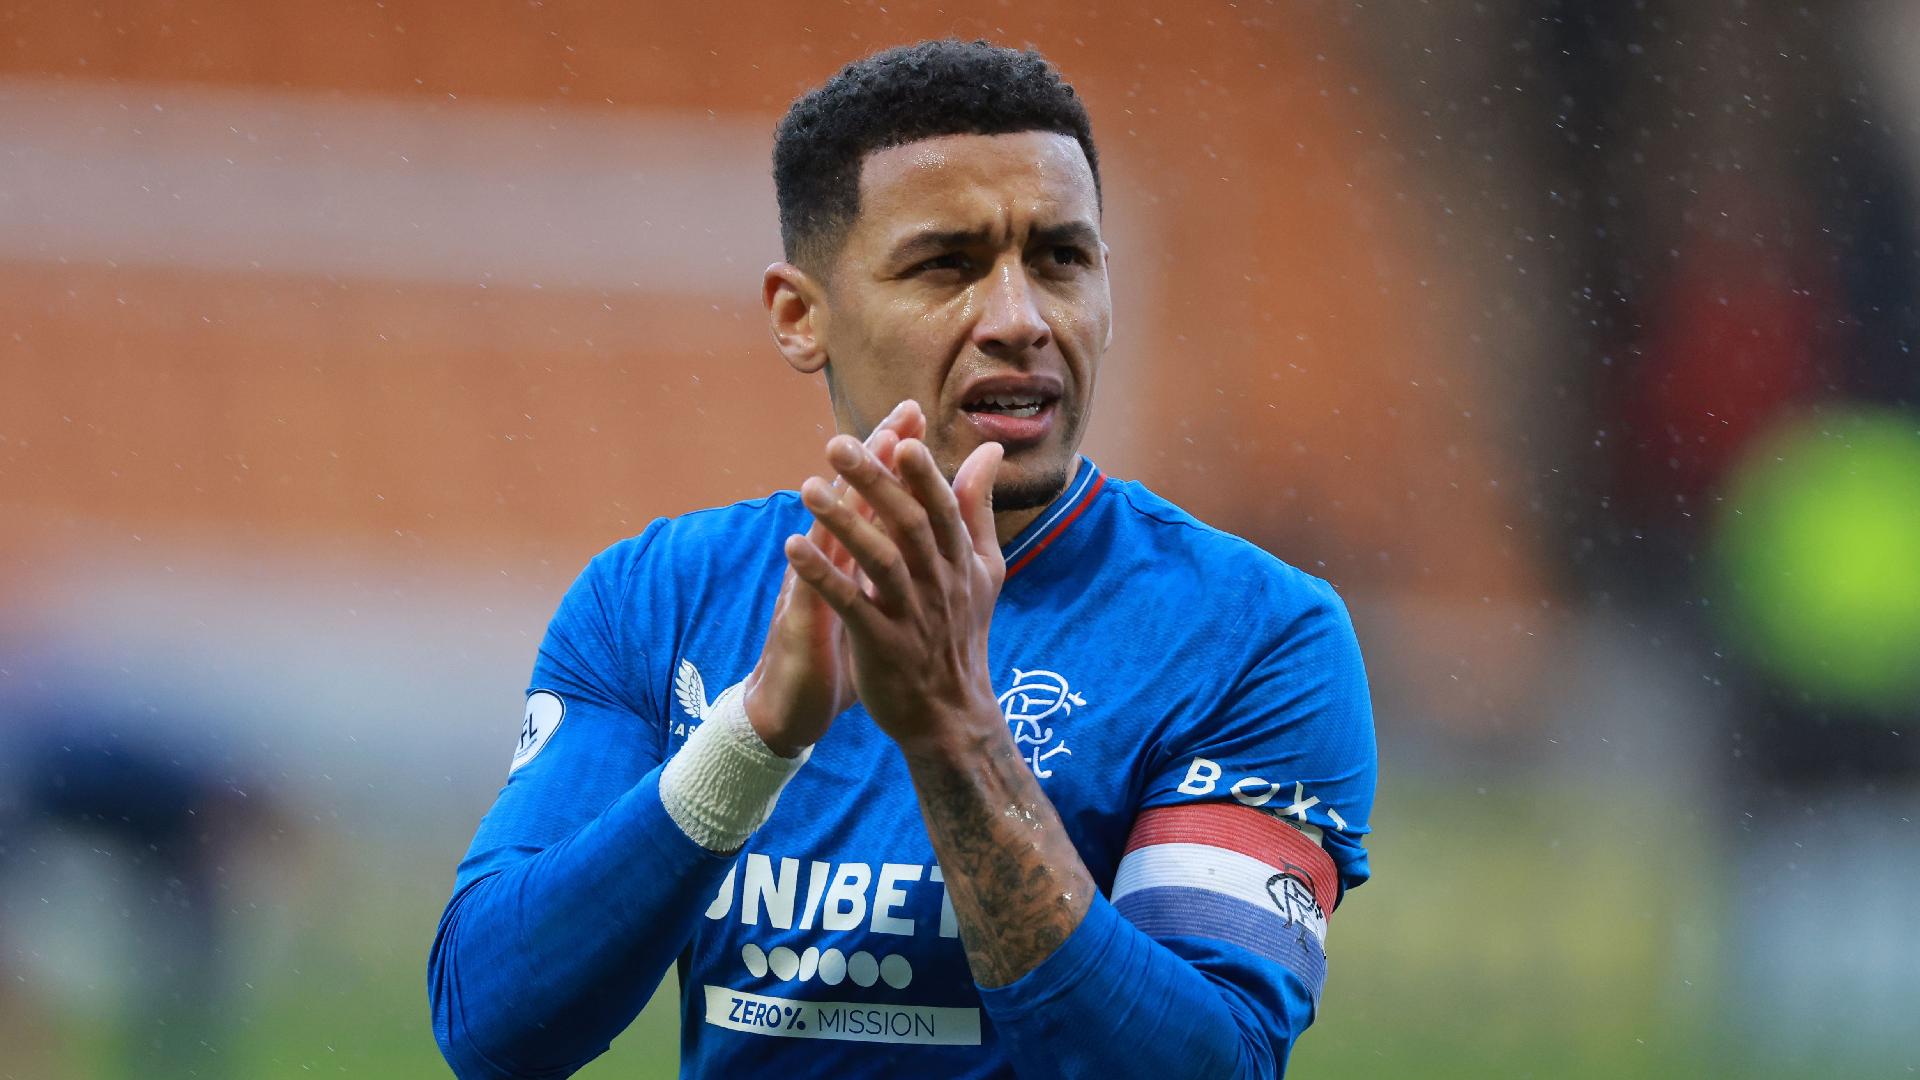 James Tavernier keen to avenge Old Firm defeat with victory over Kilmarnock | beIN SPORTS